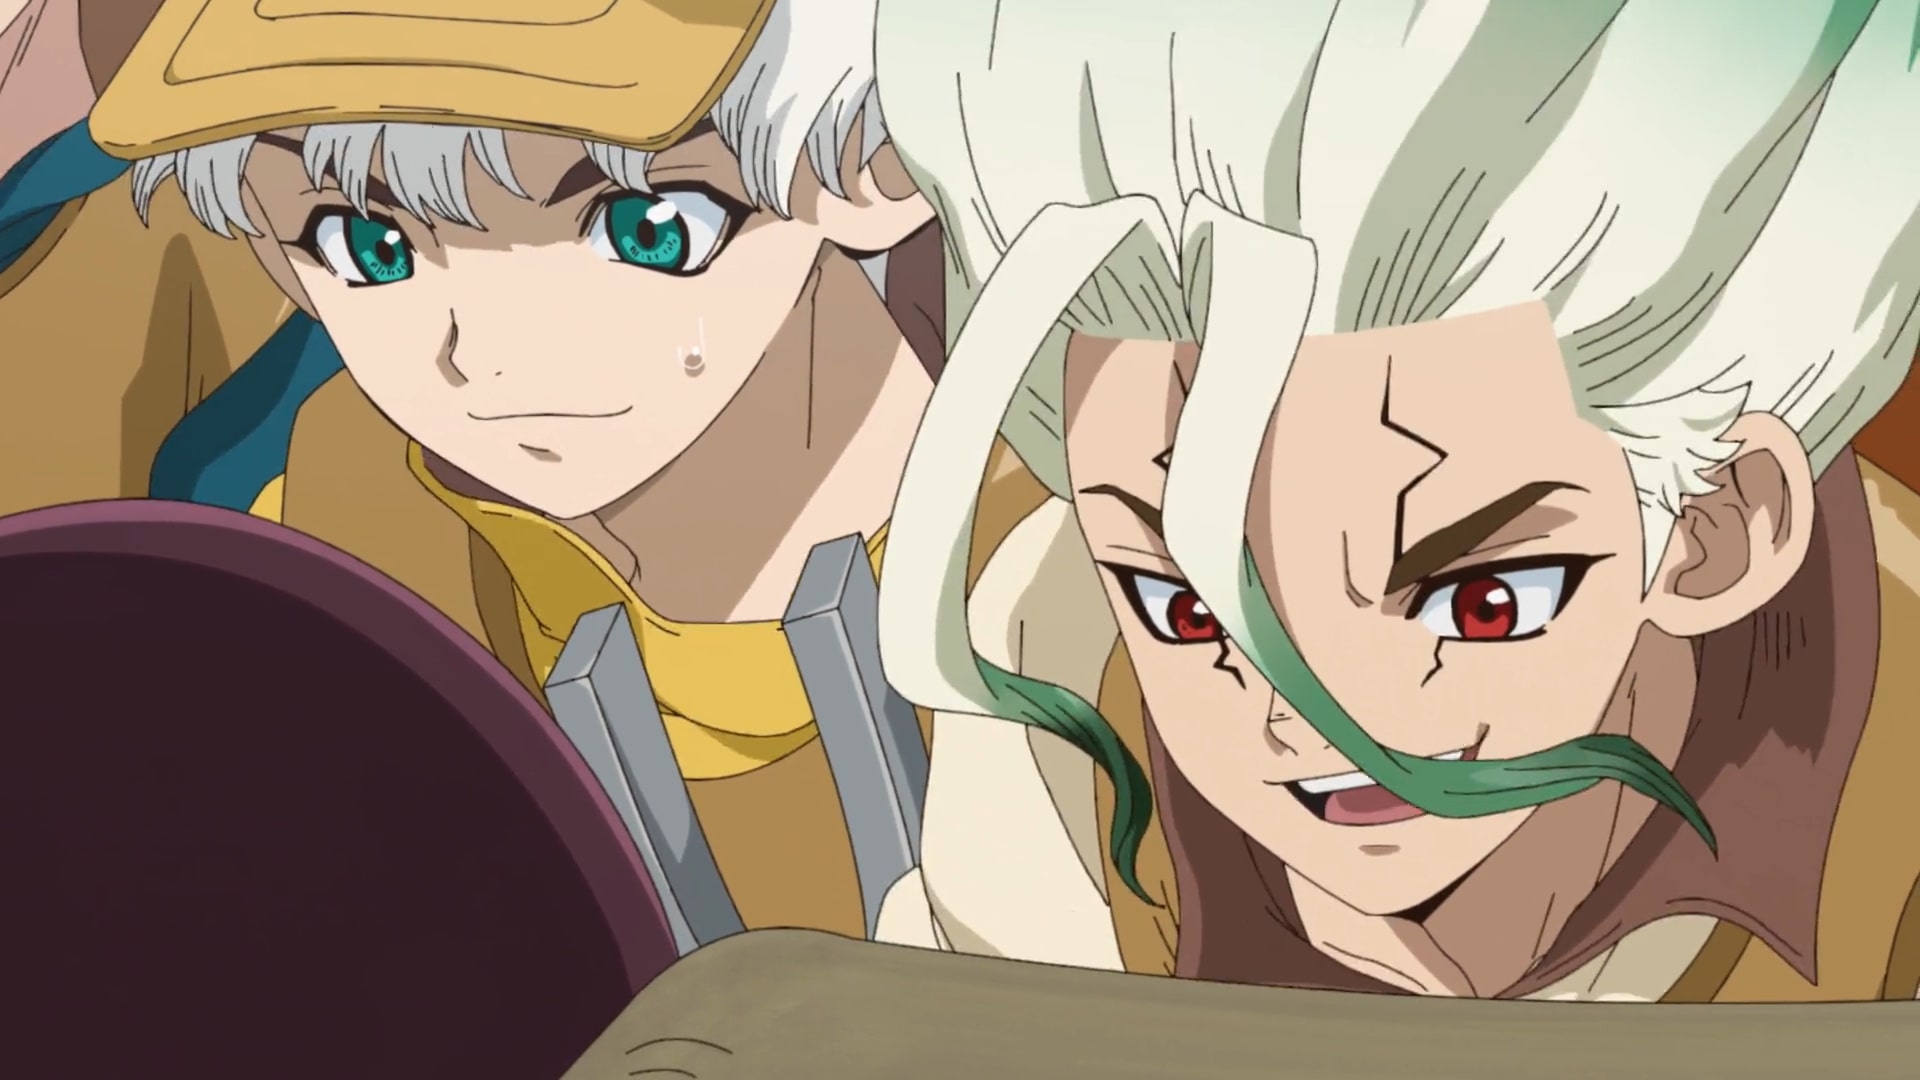 Dr Stone Season 3 Episode 4 Review: Search For the Unknown Commences